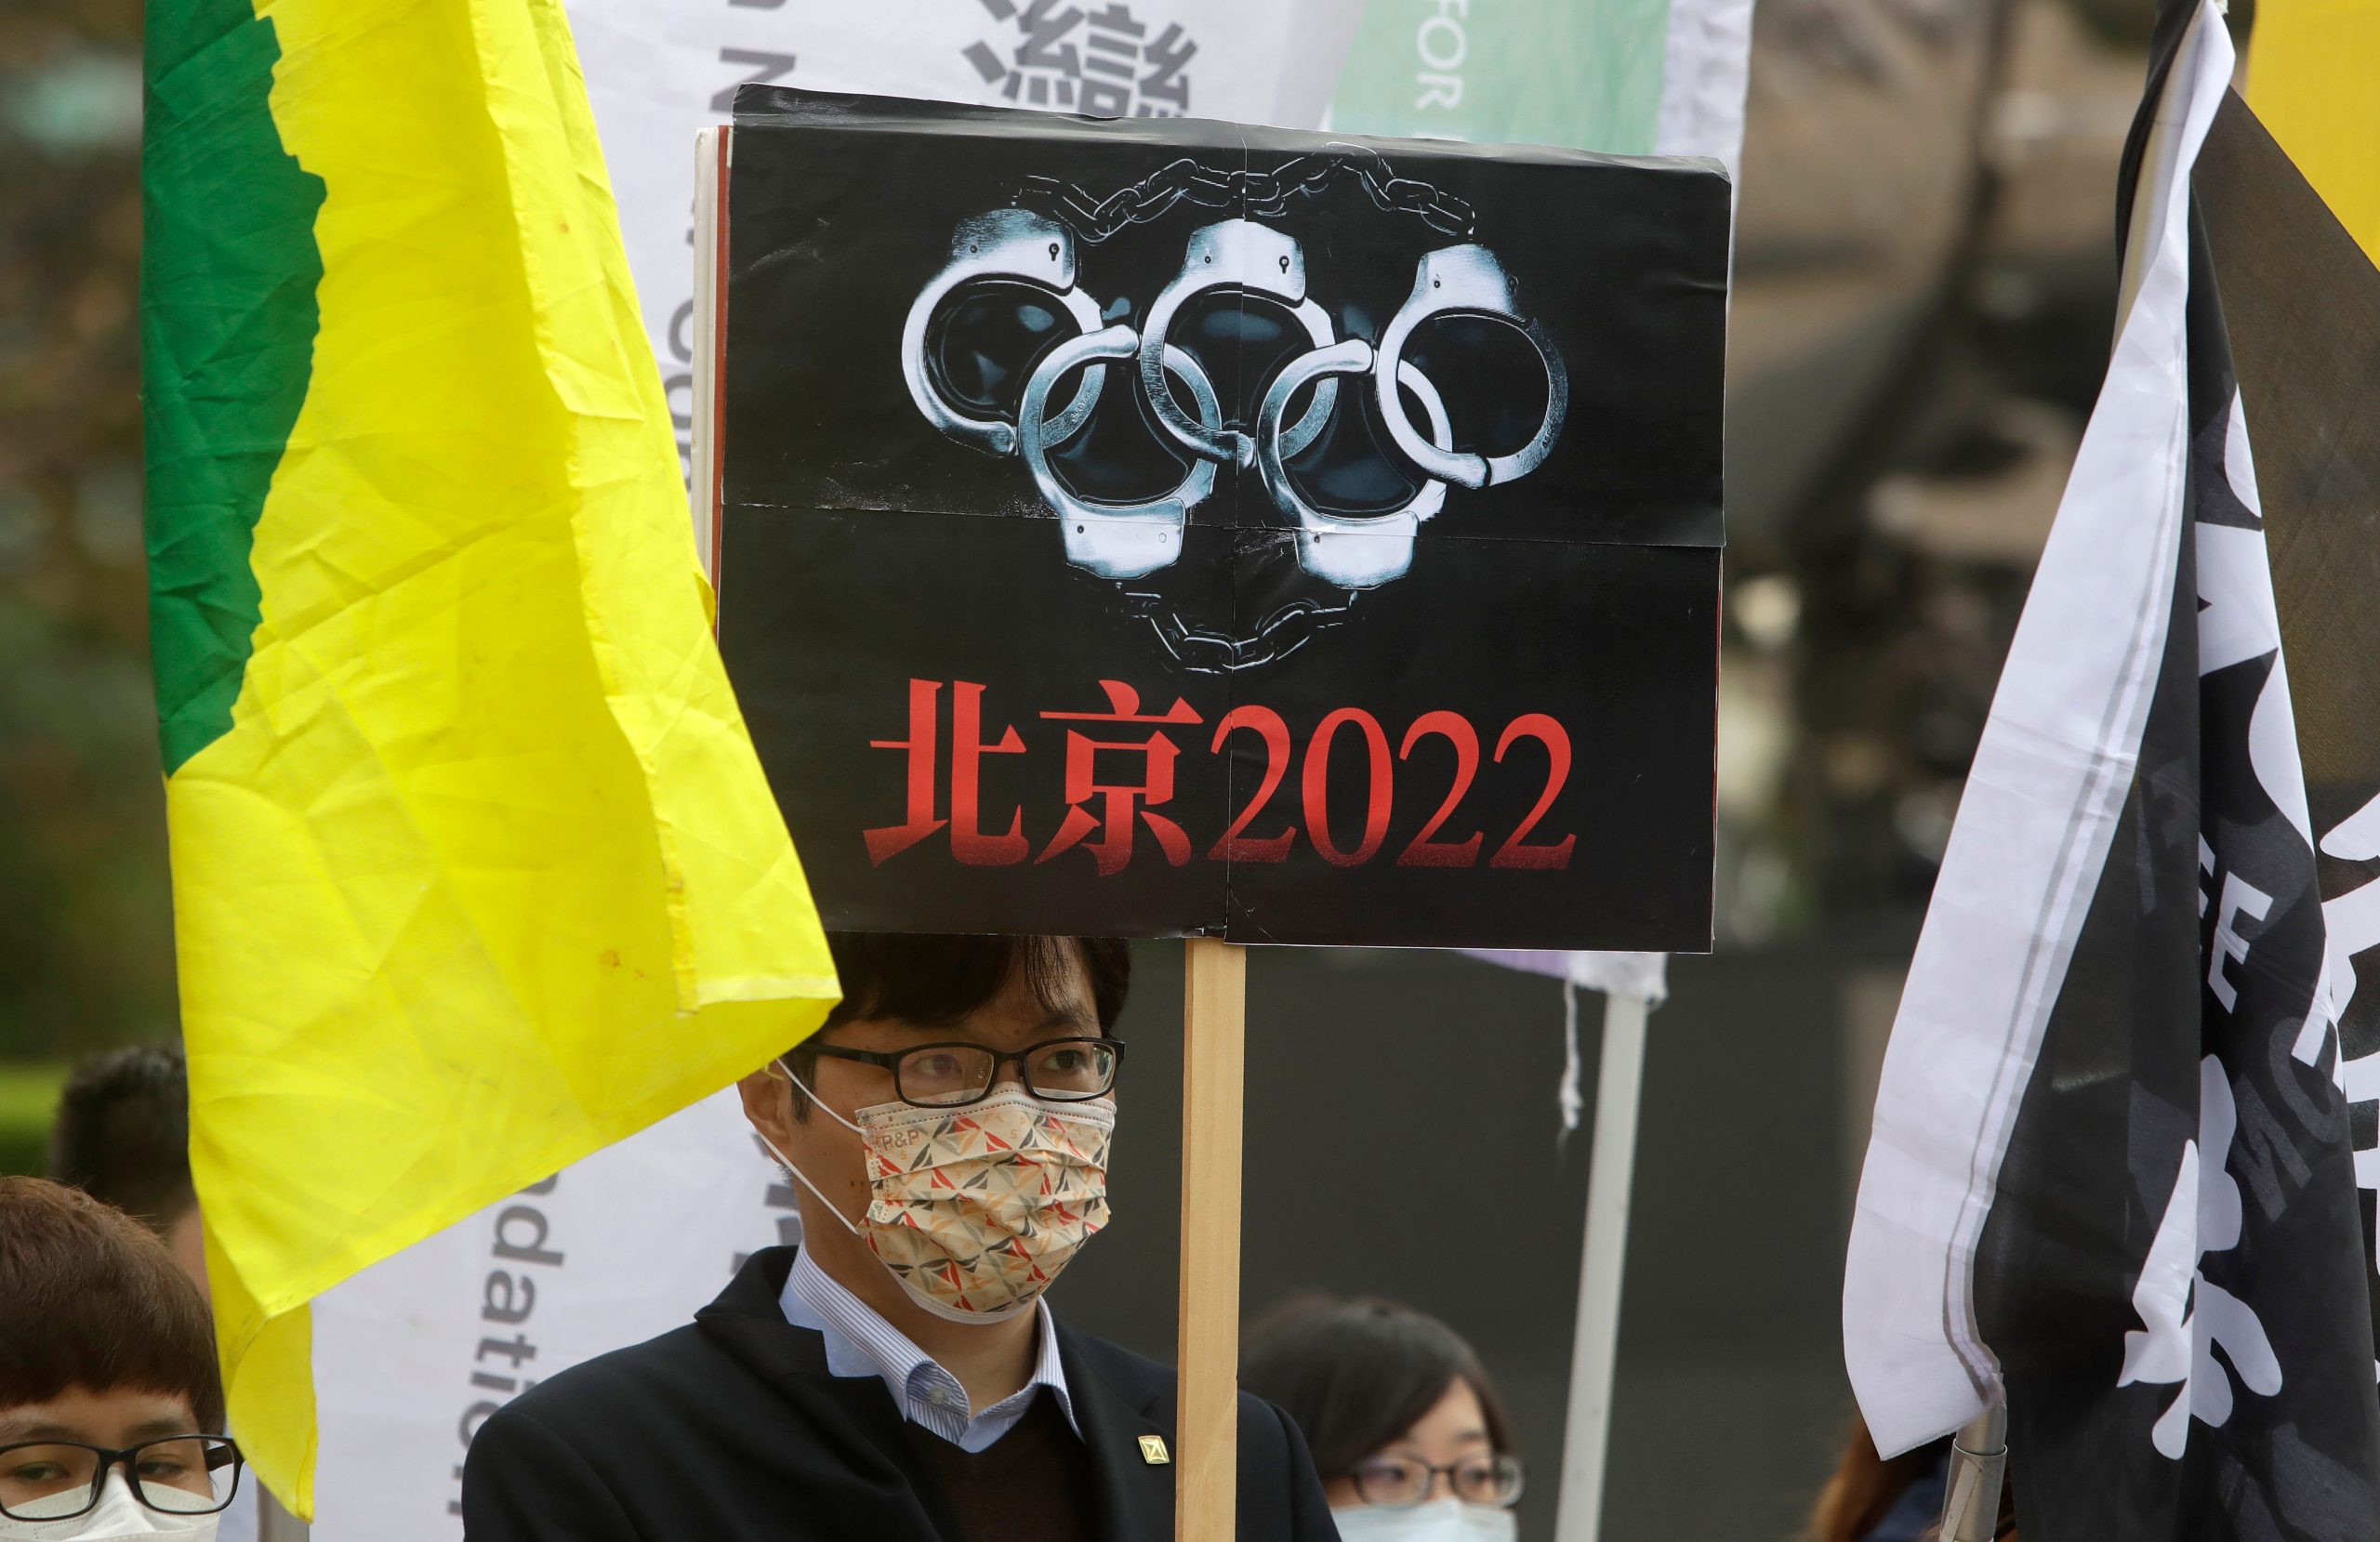 Athletes urged to speak out by activists at the Beijing Olympics